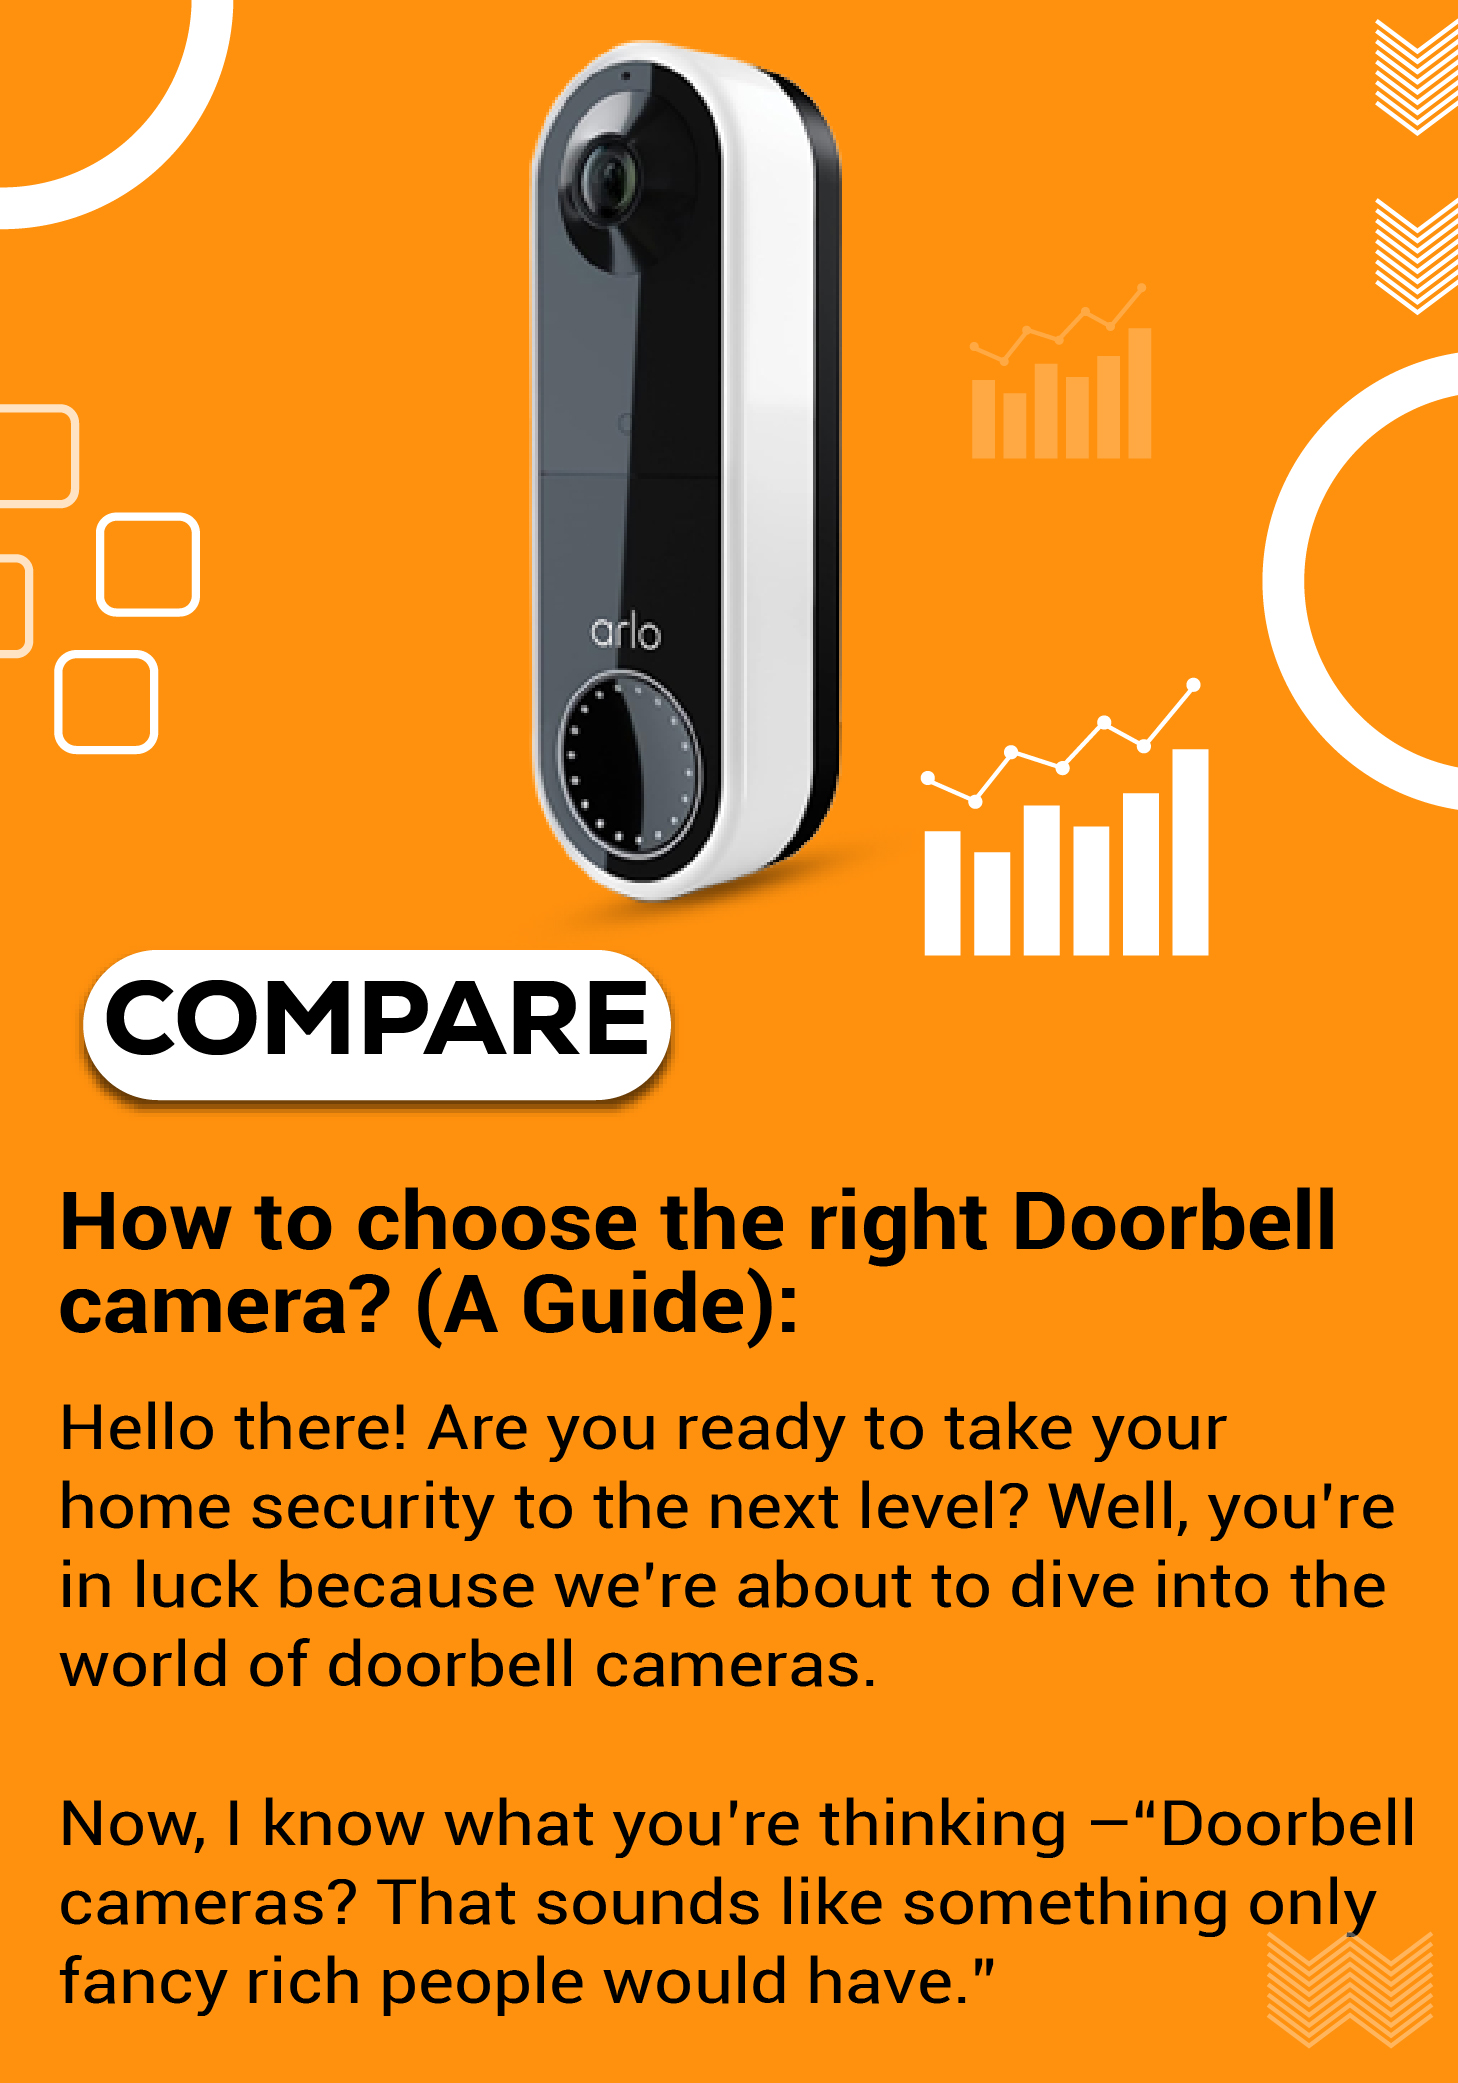 How to Choose the Right Doorbell Camera?